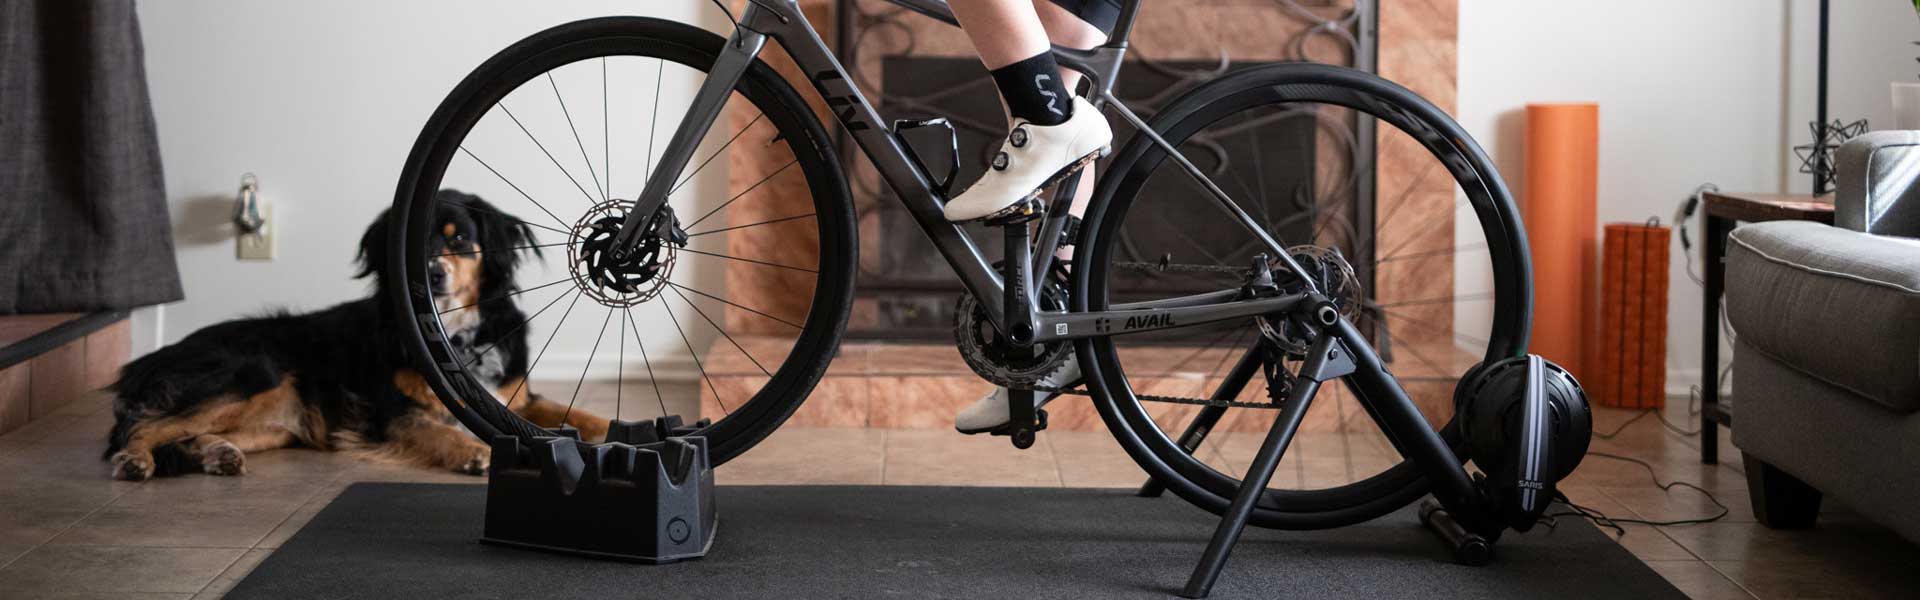 bicycle mount for indoor riding